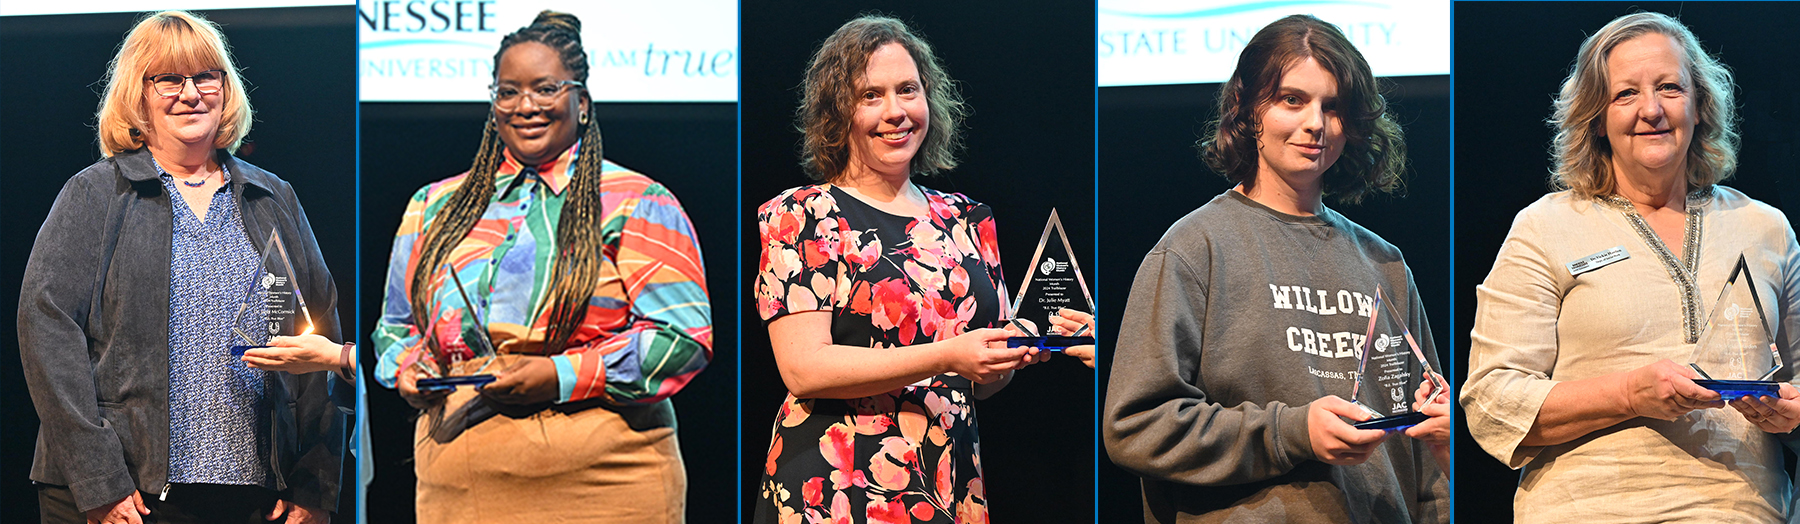 Middle Tennessee State University presented the 2024 Trailblazer Awards Tuesday, March 12, during a ceremony inside Tucker Theatre. Pictured, from left, are Janet McCormick, Communication Studies professor; Nia Allen, Diversity Dissertation Fellow in Textiles, Merchandising and Design Program; Julie Myatt, associate professor of English and MT Engage director; psychology student Zofia Zagalsky; and Vickie Harden, associate professor and Master of Social Work Program coordinator. The awards are presented annually as part of the university’s Women’s History Month observance and honors women on campus who positively impact the campus community. (MTSU photo illustration; photos by James Cessna)